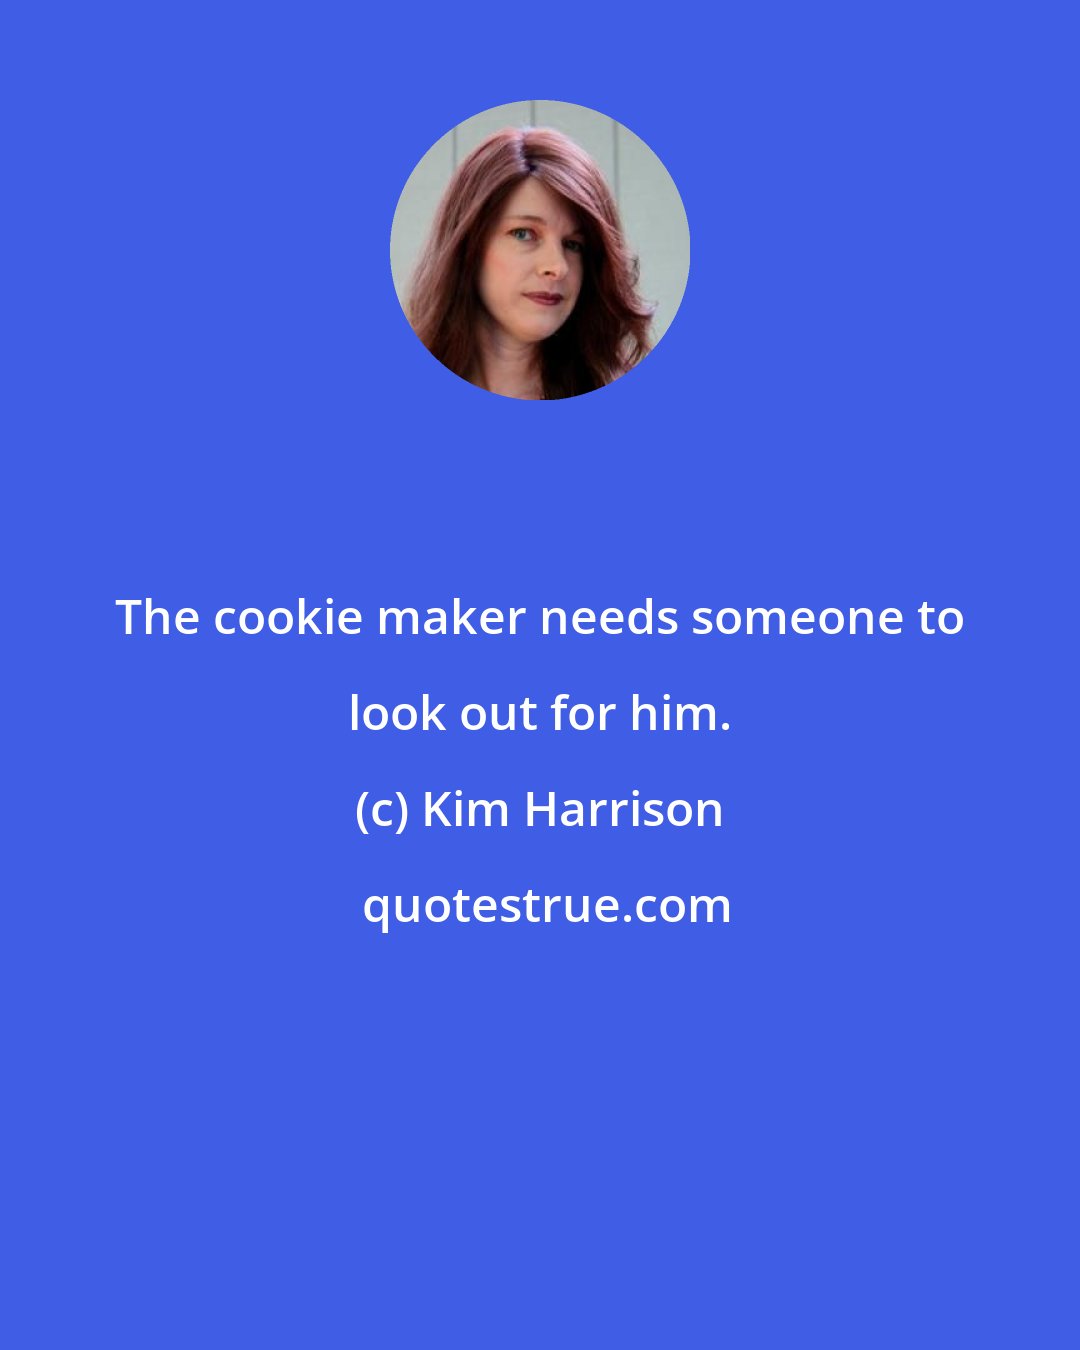 Kim Harrison: The cookie maker needs someone to look out for him.